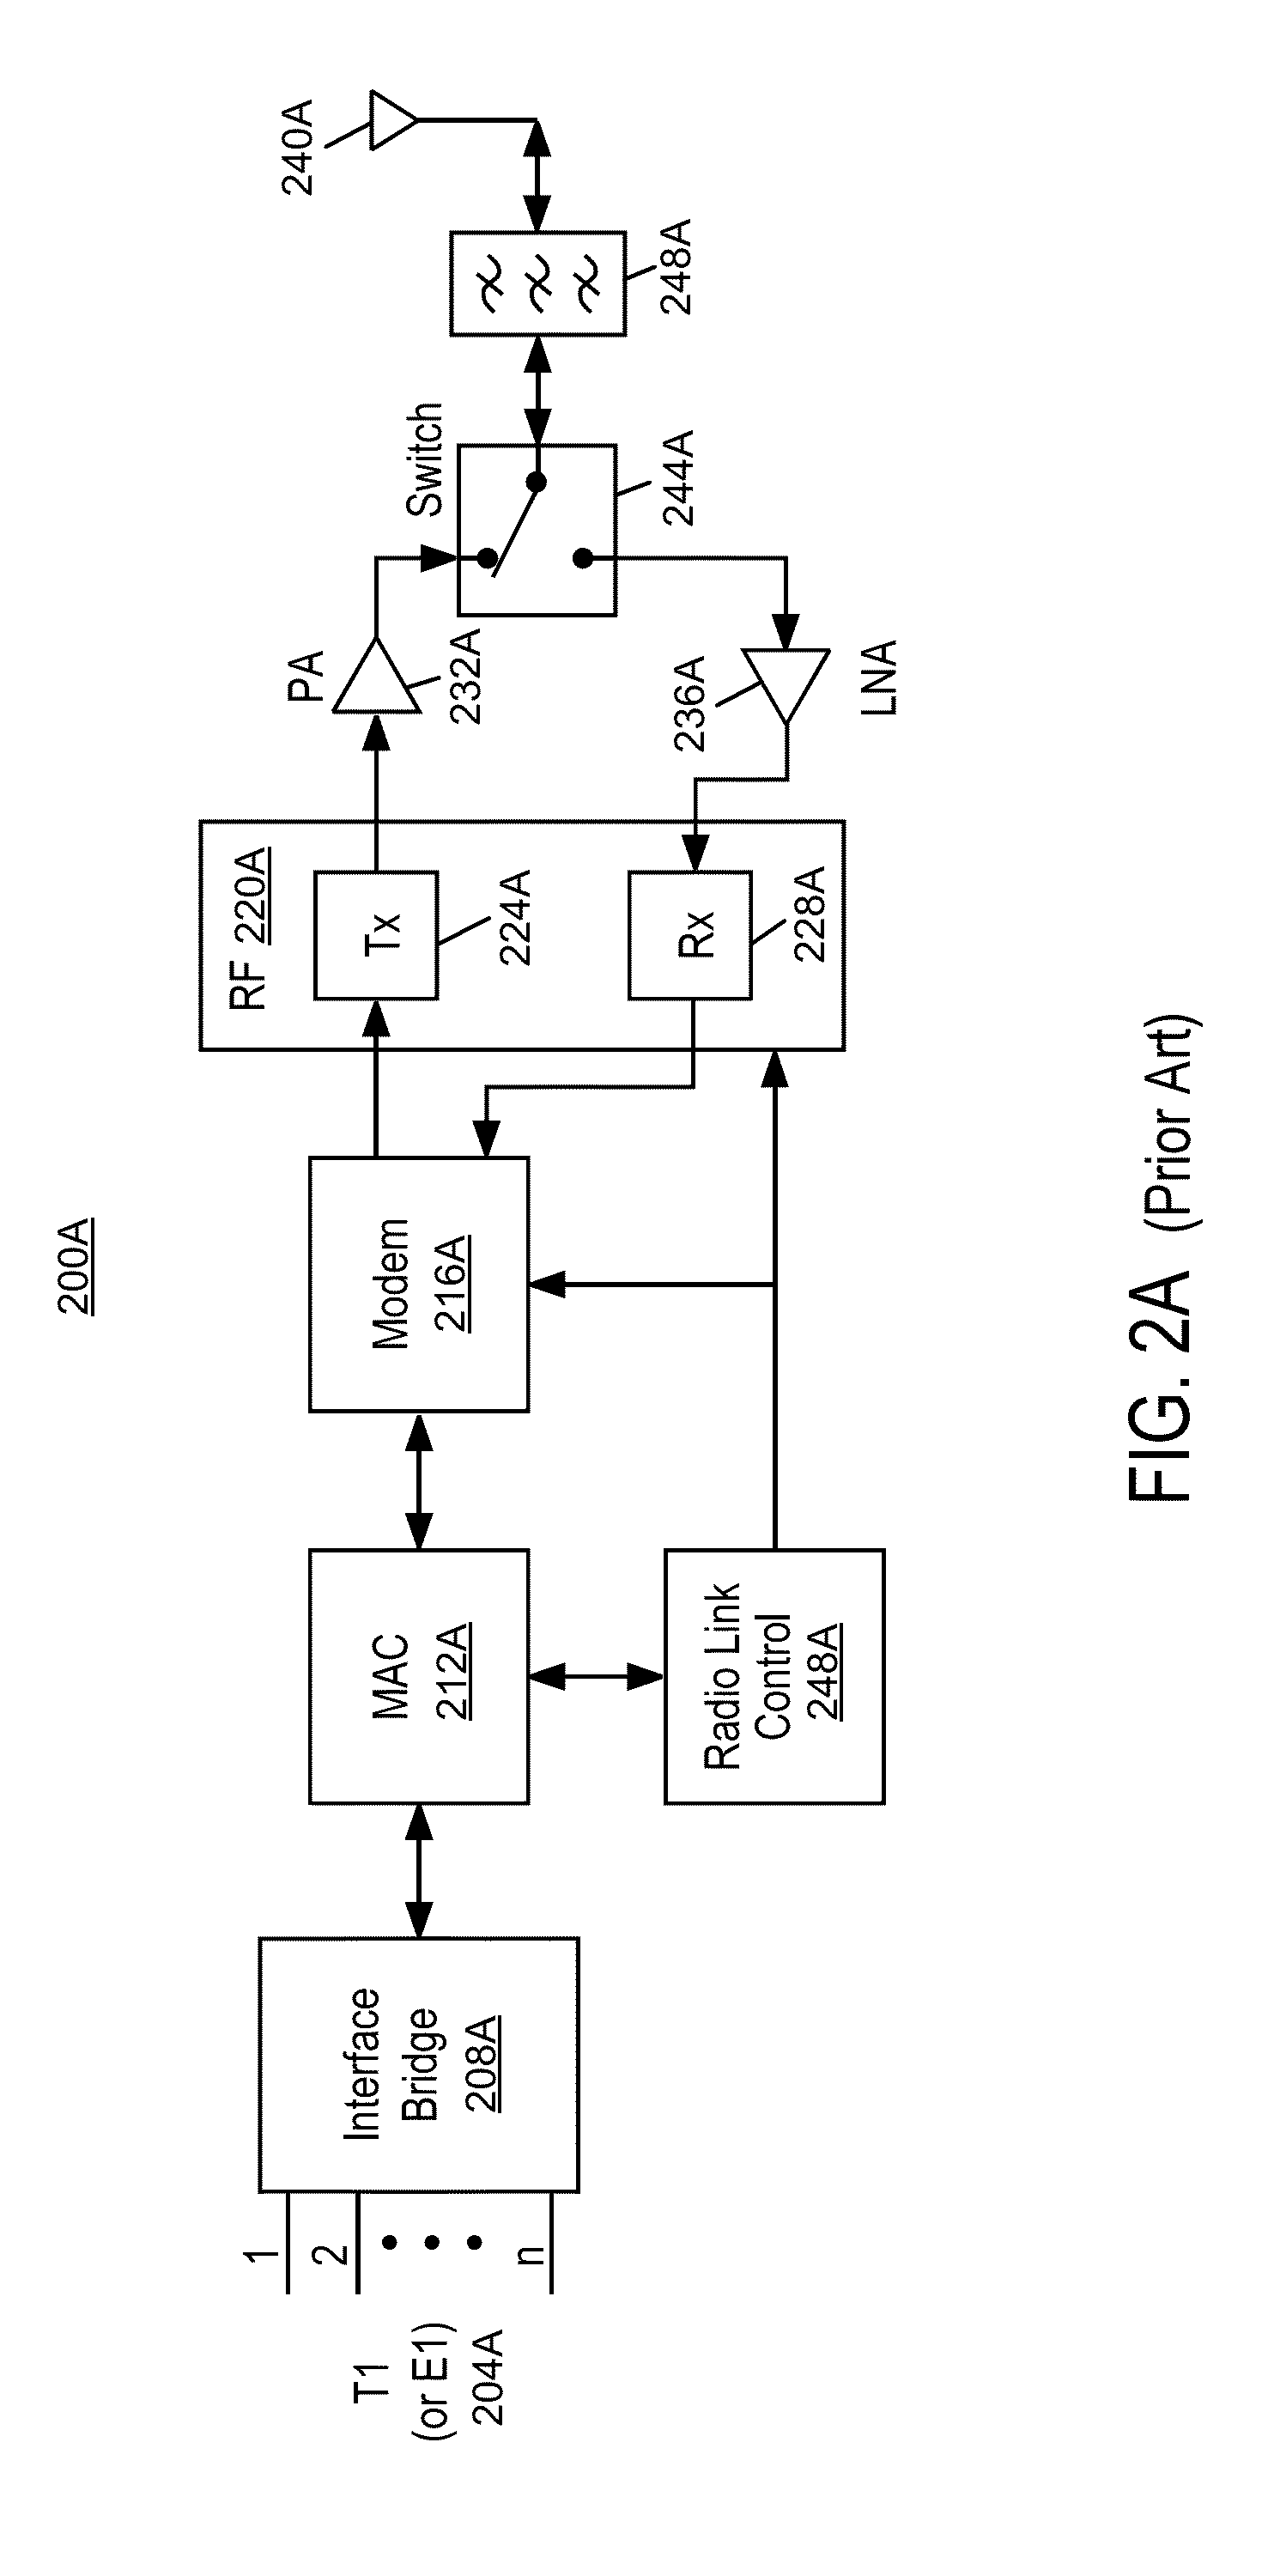 Enhancement of the channel propagation matrix order and rank for a wireless channel